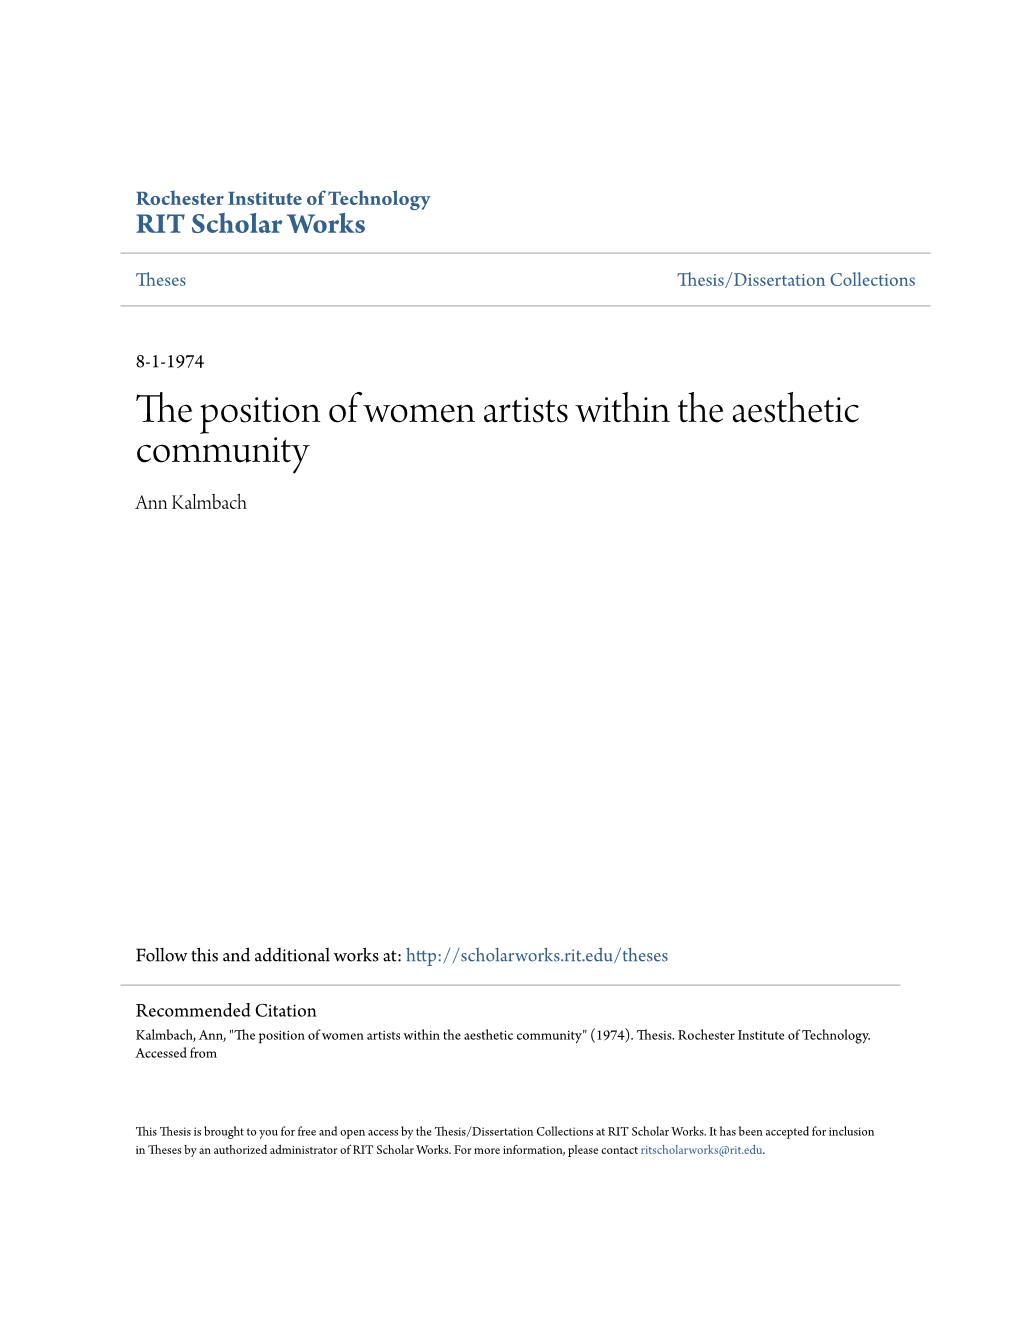 The Position of Women Artists Within the Aesthetic Community Ann Kalmbach